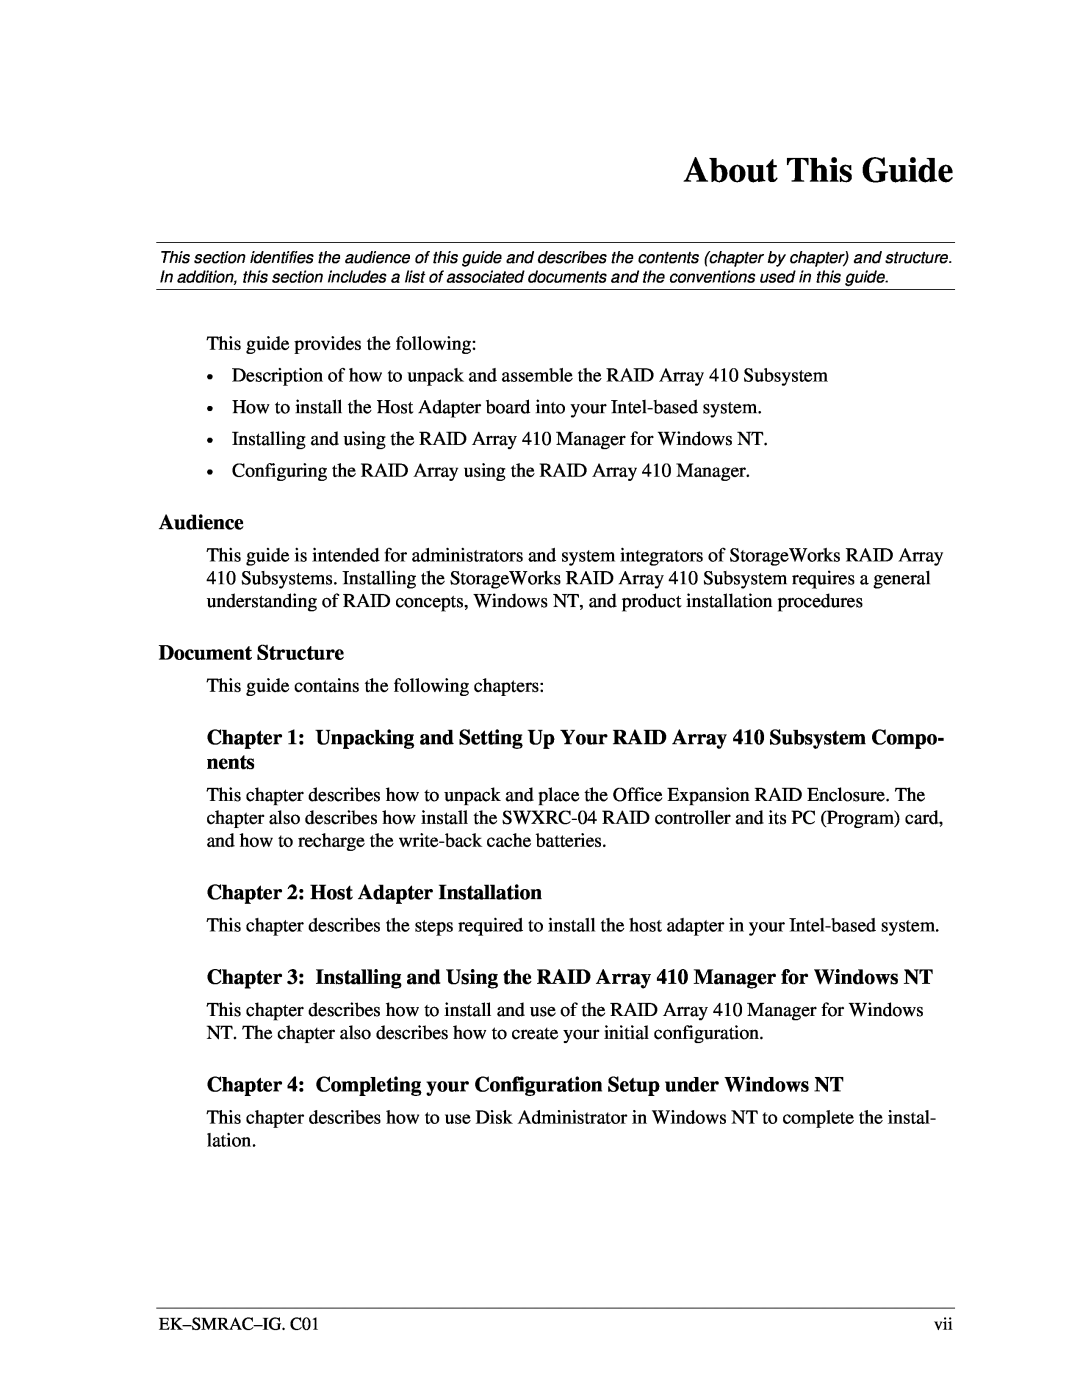 Intel 410 manual About This Guide, Audience, Document Structure, Host Adapter Installation 